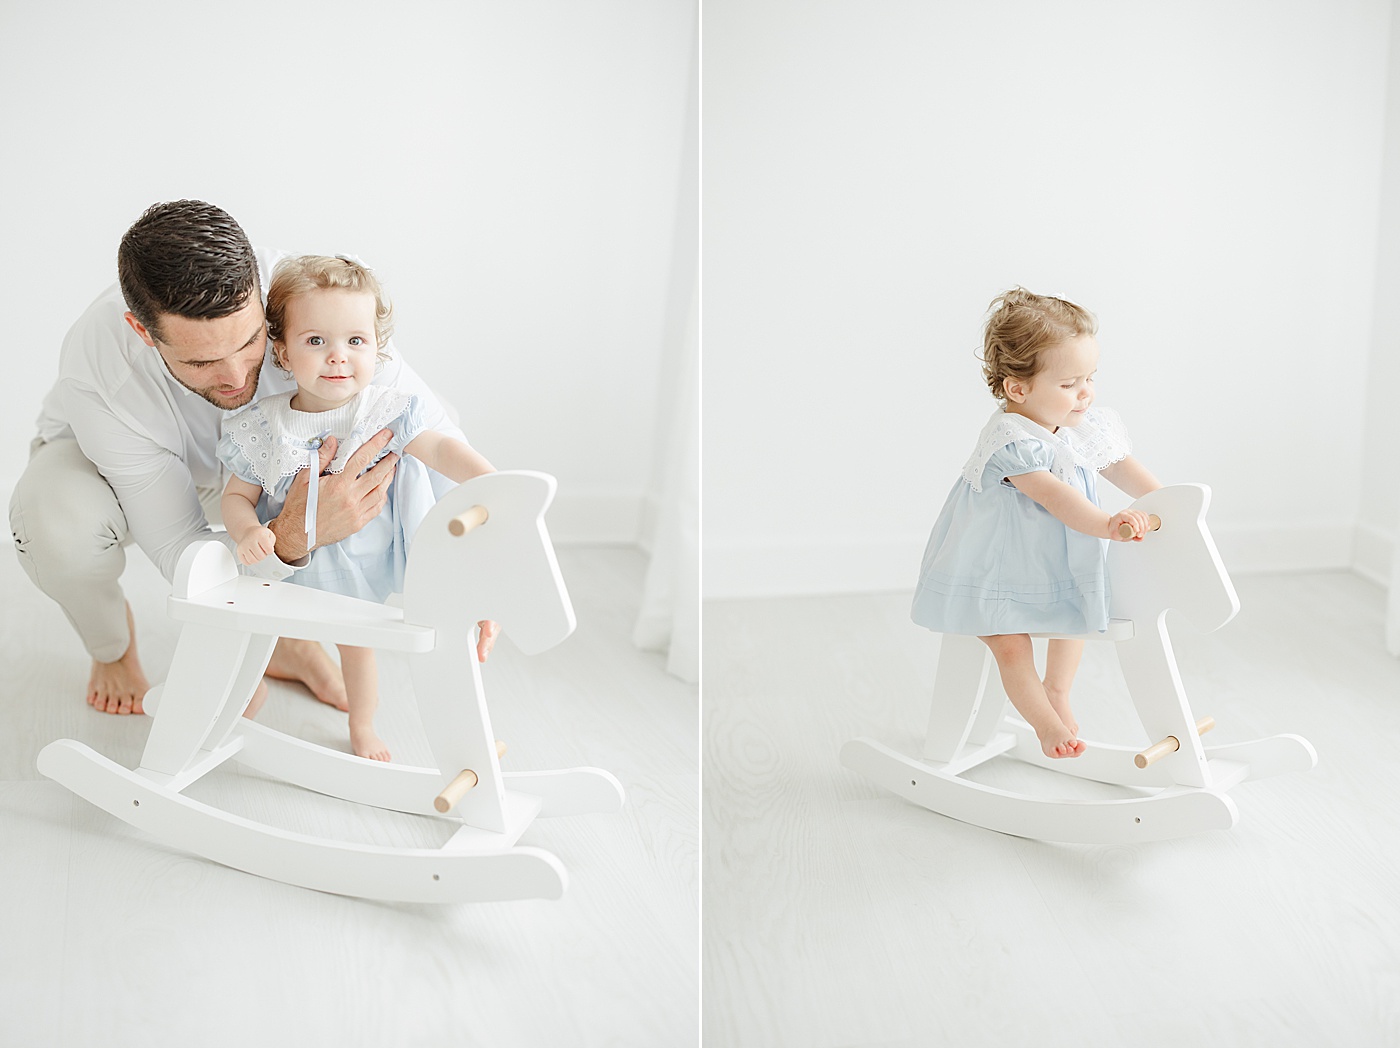 One year old riding a rocking horse during first birthday photoshoot with Kristin Wood Photography.